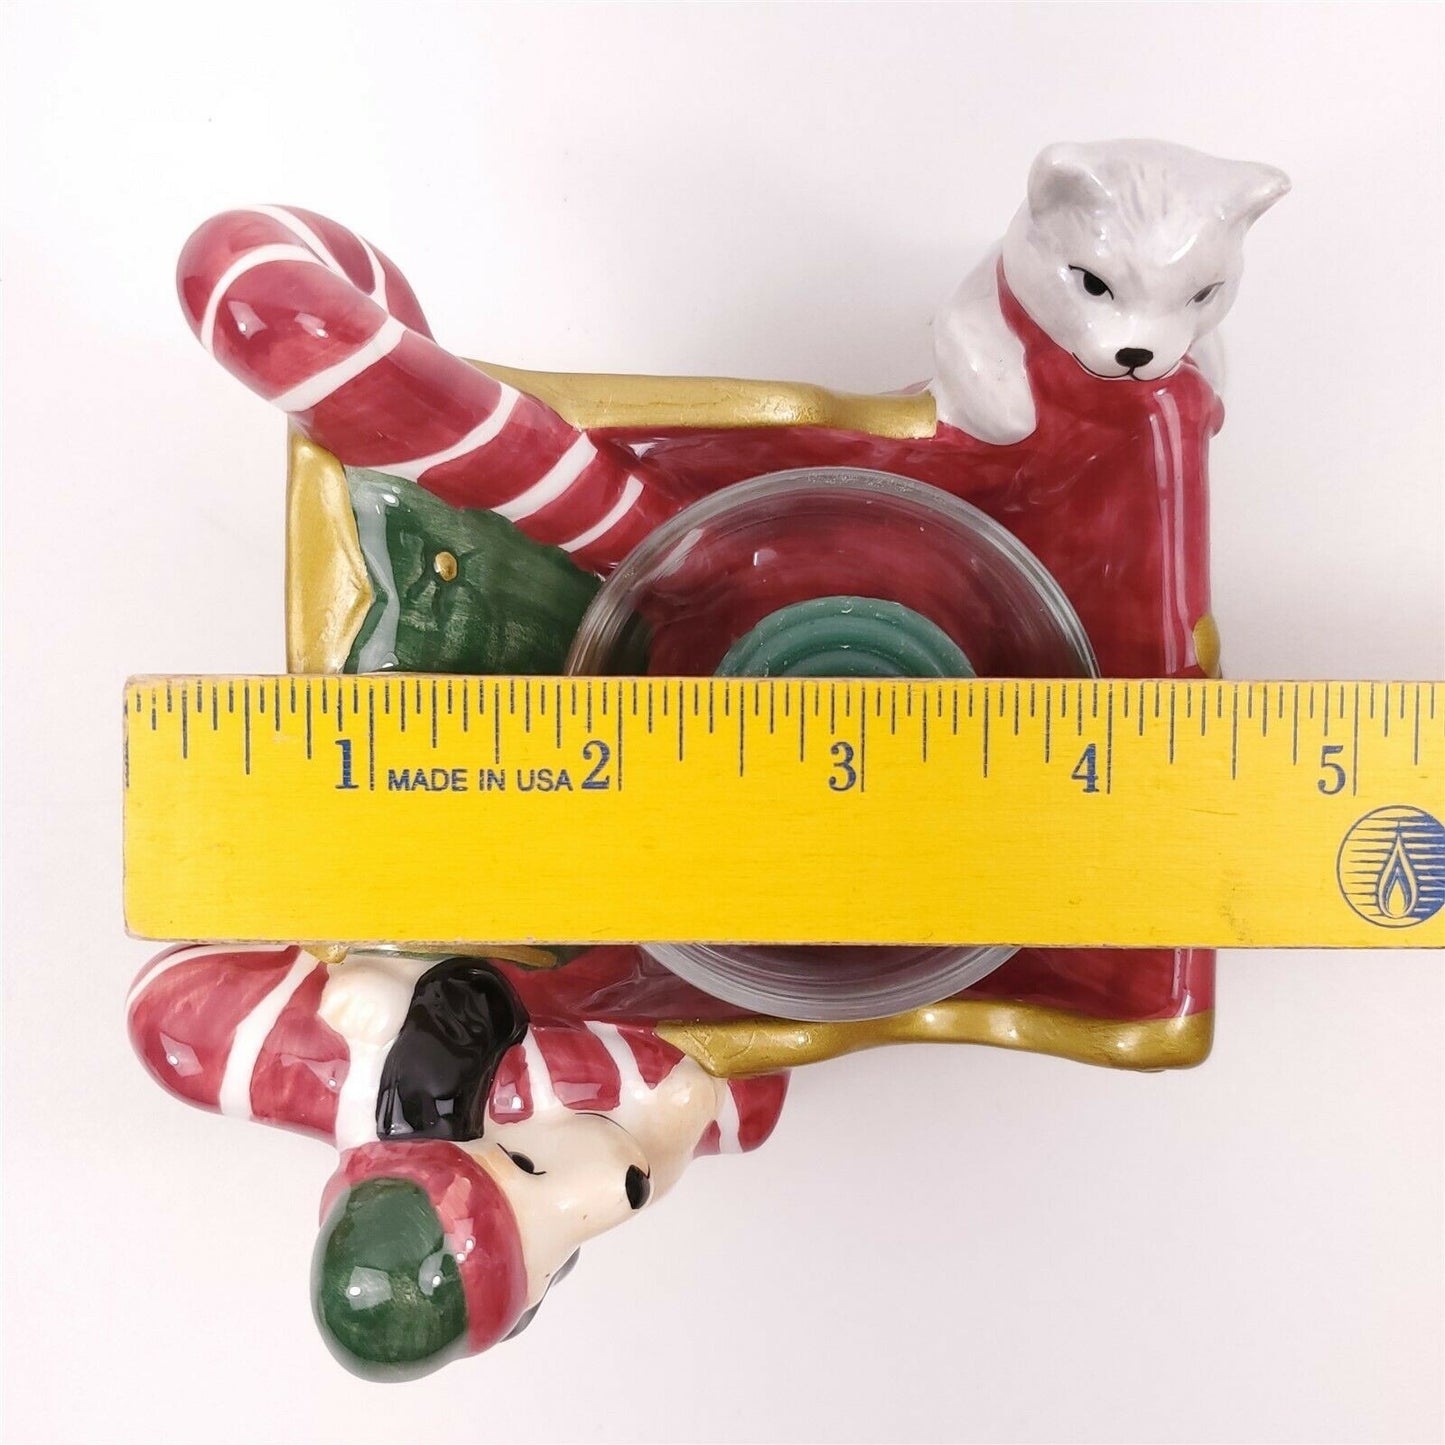 Home for the Holidays 96008 1997 May Dept. Stores Cat Dog Candy Cane w/ Box